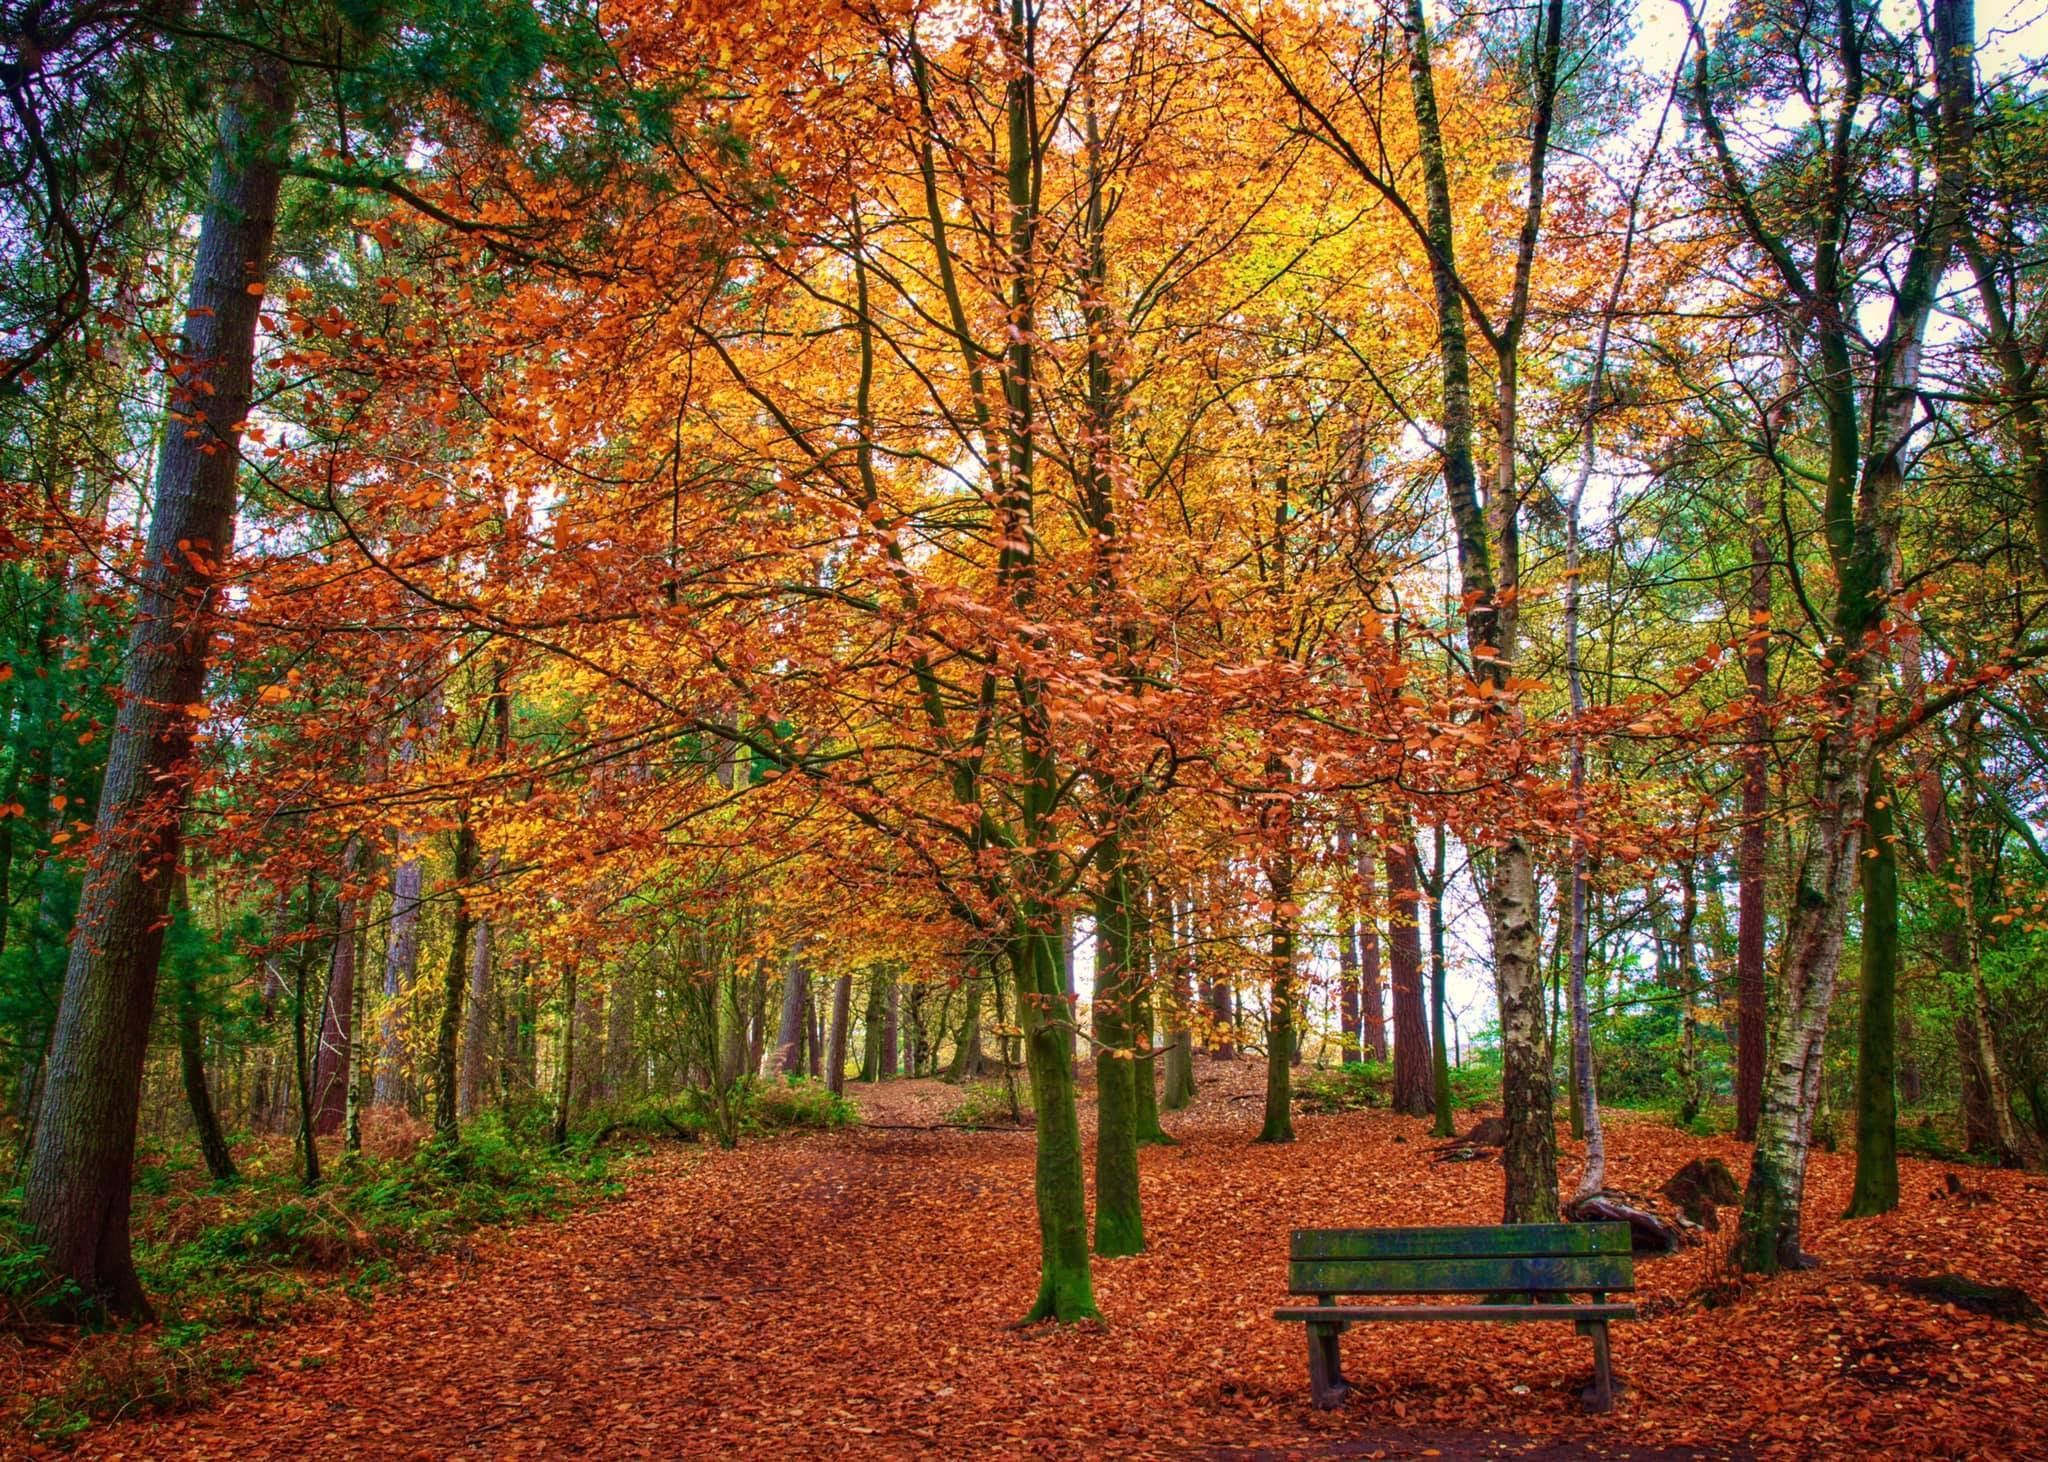 The Sandstone Trail runs through Delamere Forest (Picture: Imagewich)